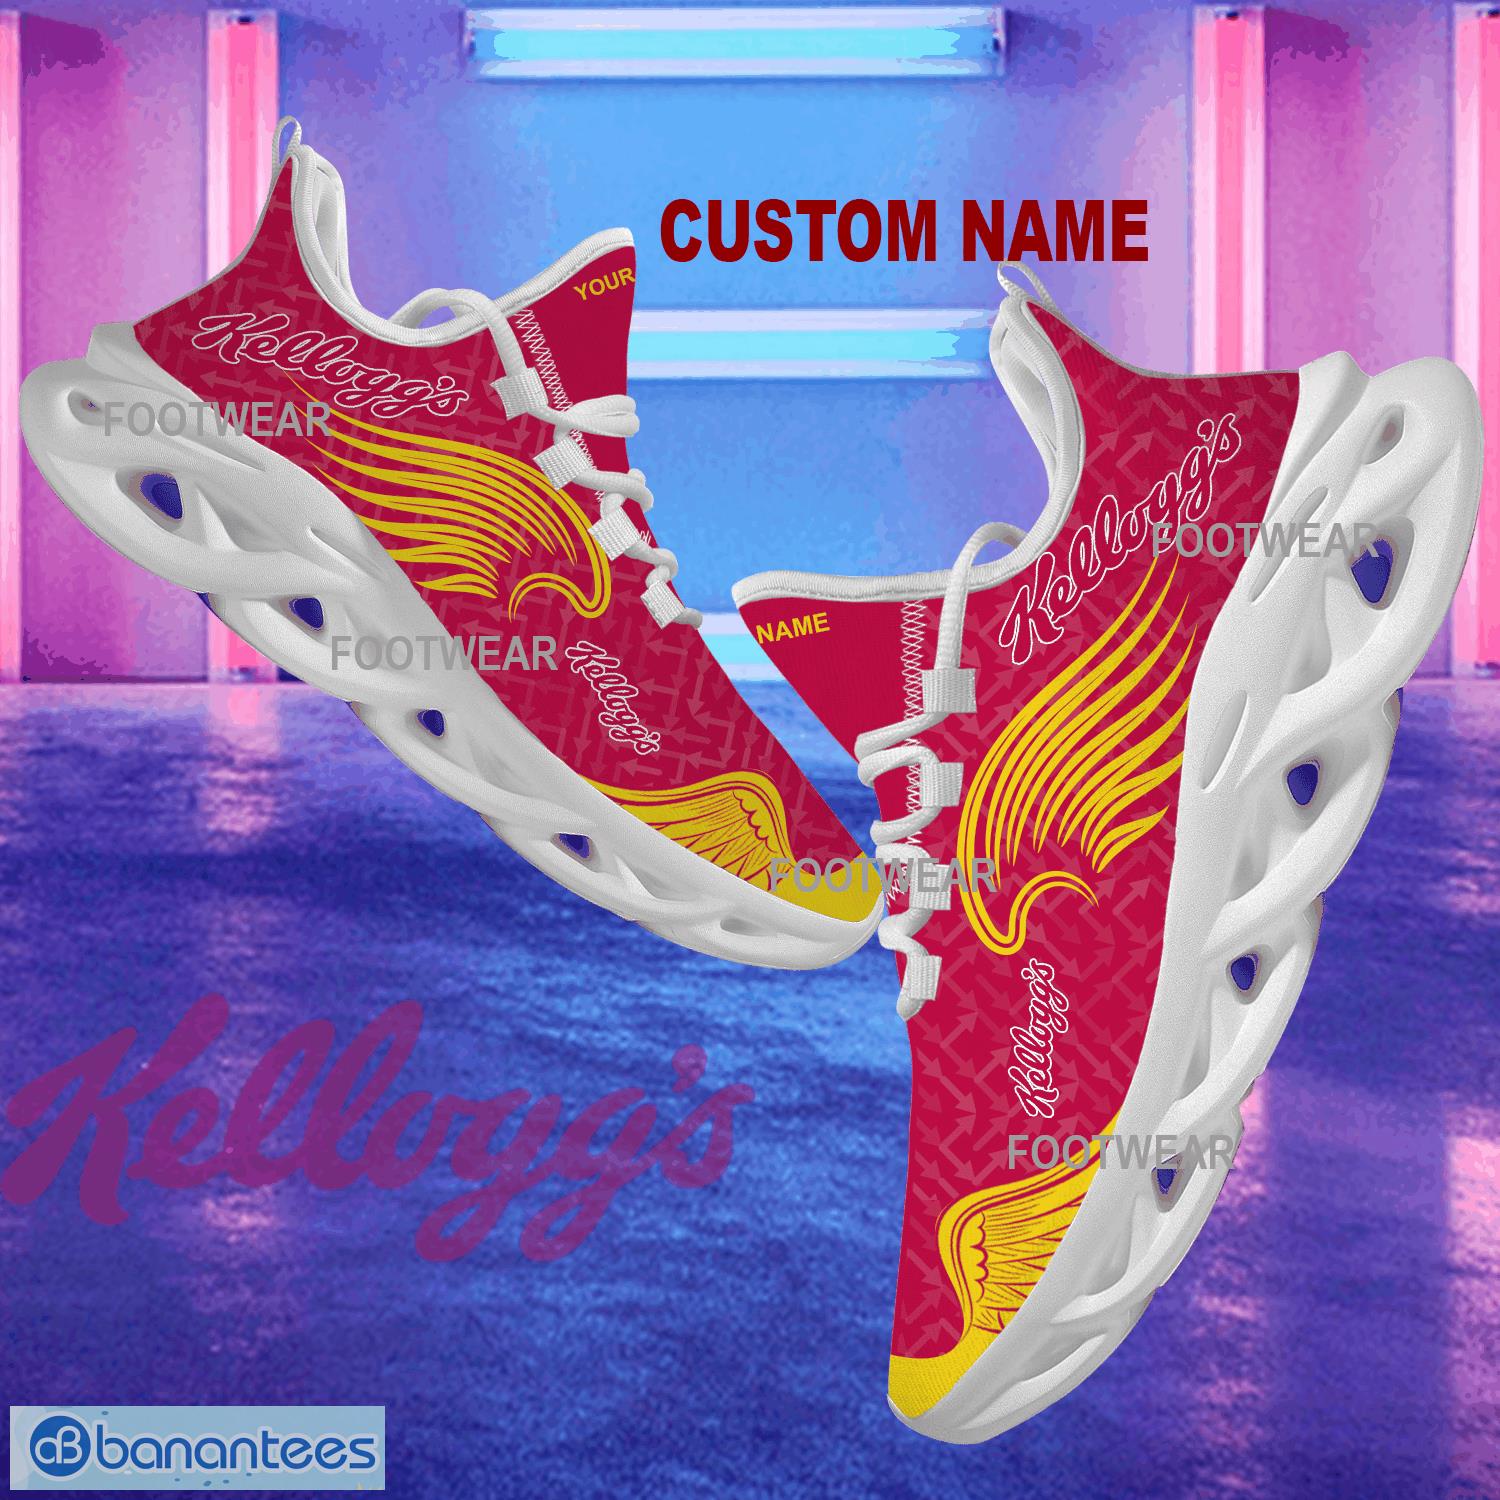 Kellogg’s Brand Logo New Wings Pattern Max Soul Shoes Custom Name Gift Running Sneakers - Kellogg’s Brand Logo New Wings Pattern Max Soul Shoes Custom Name Photo 1